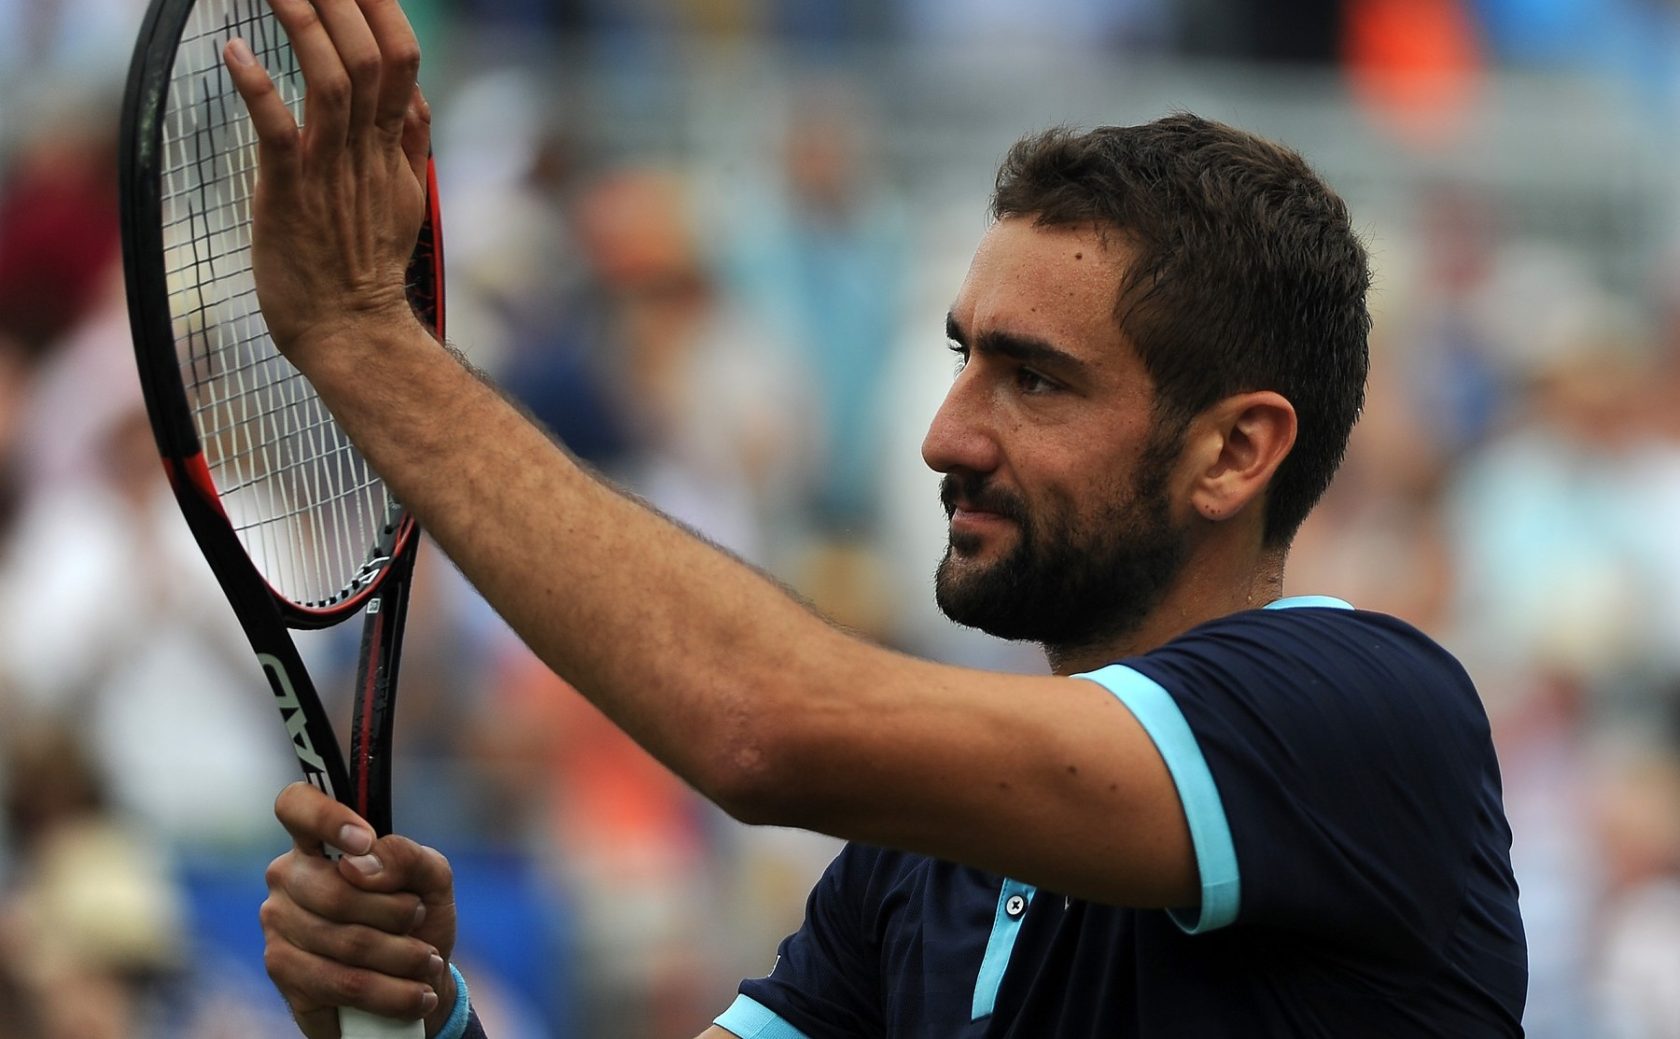 Jun 23, 2017 - England, United Kingdom - Aegon Championships 2017 - Marin Cilic v Donald Young (Credit Image: Â© Kevin Quigley/Daily Mail/SOLO Syndication), Image: 339246636, License: Rights-managed, Restrictions: , Model Release: no, Credit line: Profimedia, Solo